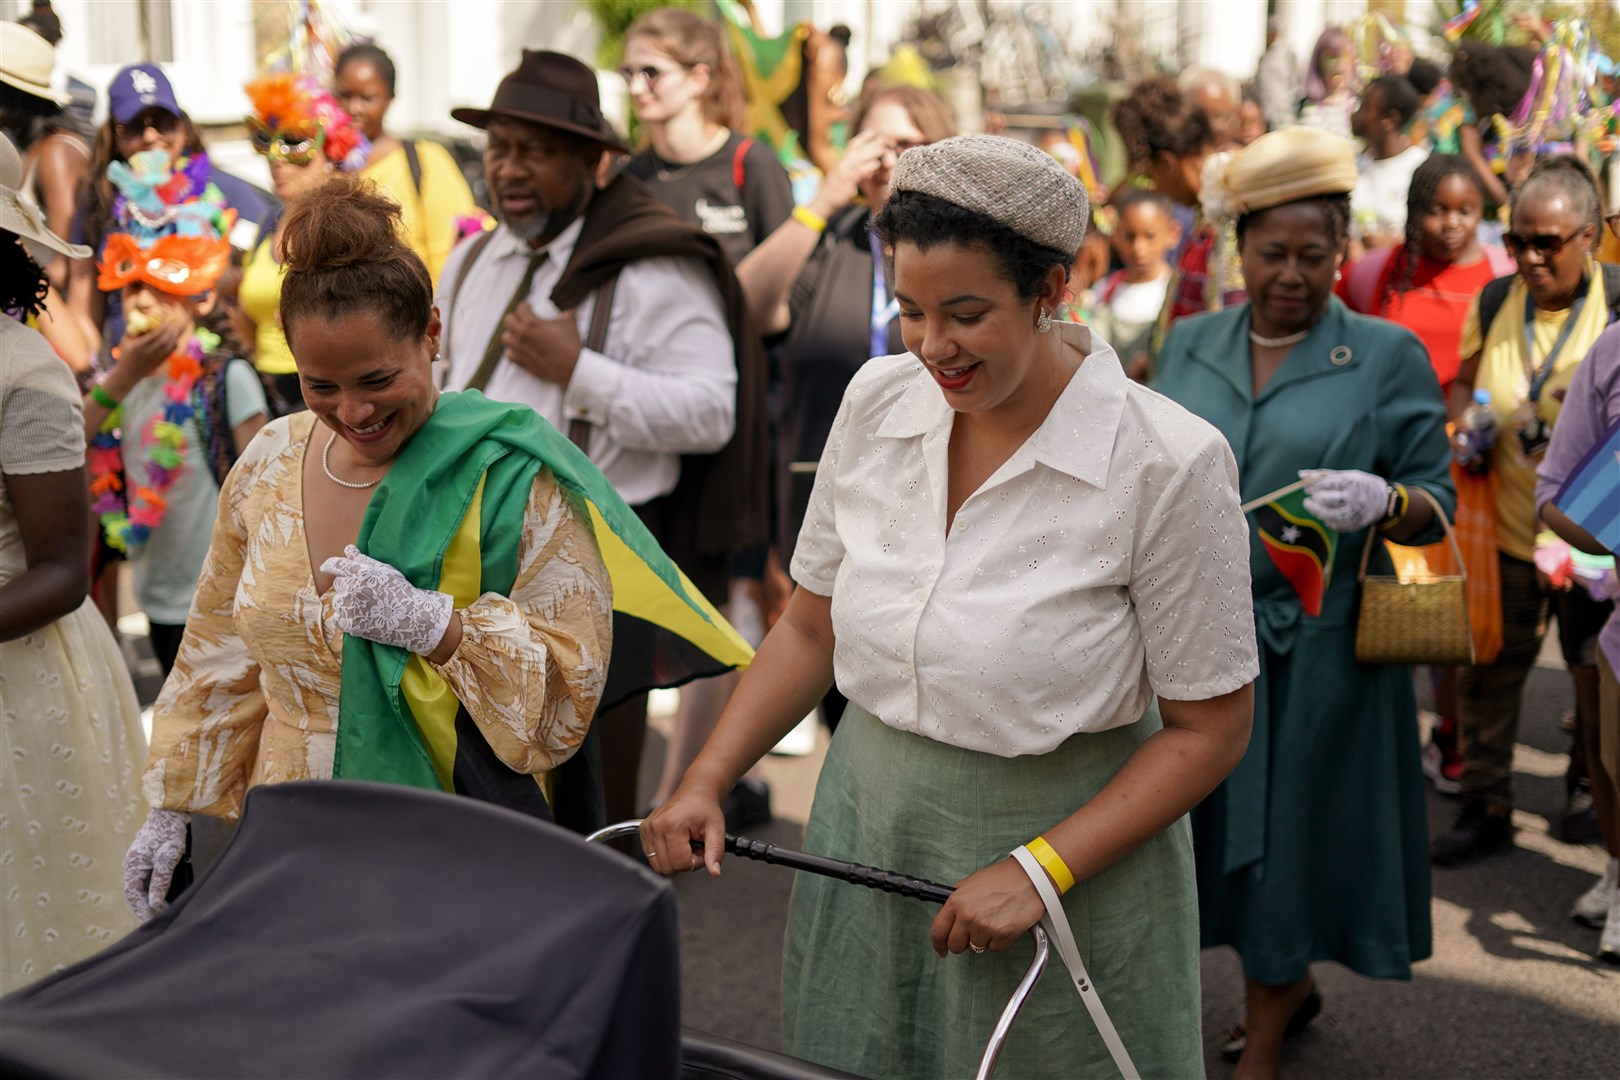 Many of those in the parade carried Caribbean flags (Alberto Pezzali/AP)